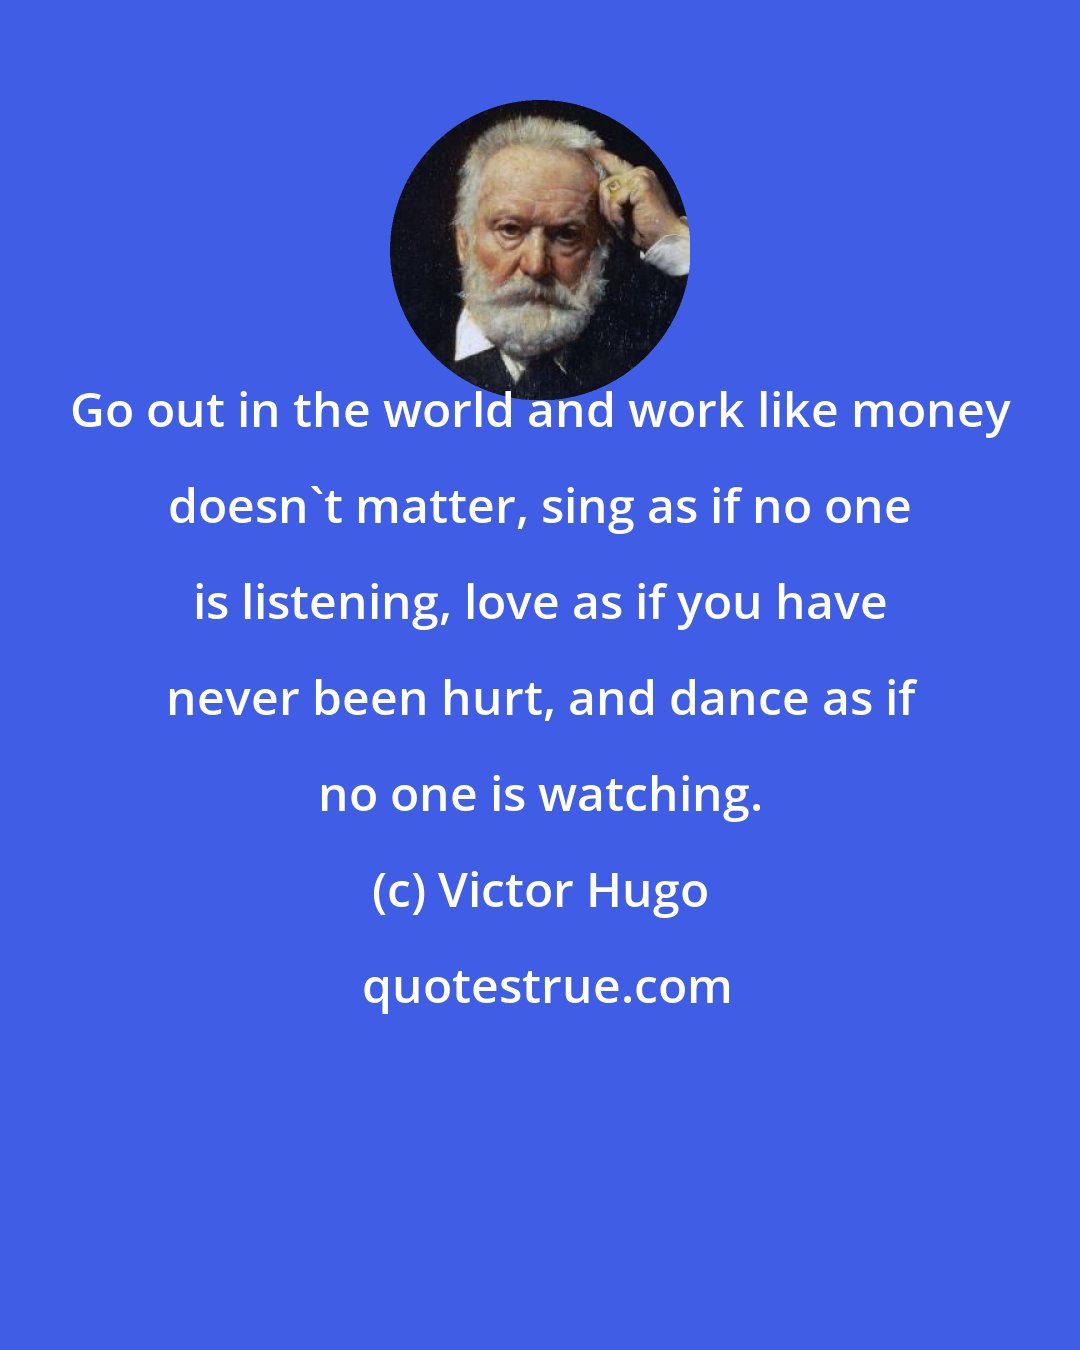 Victor Hugo: Go out in the world and work like money doesn't matter, sing as if no one is listening, love as if you have never been hurt, and dance as if no one is watching.